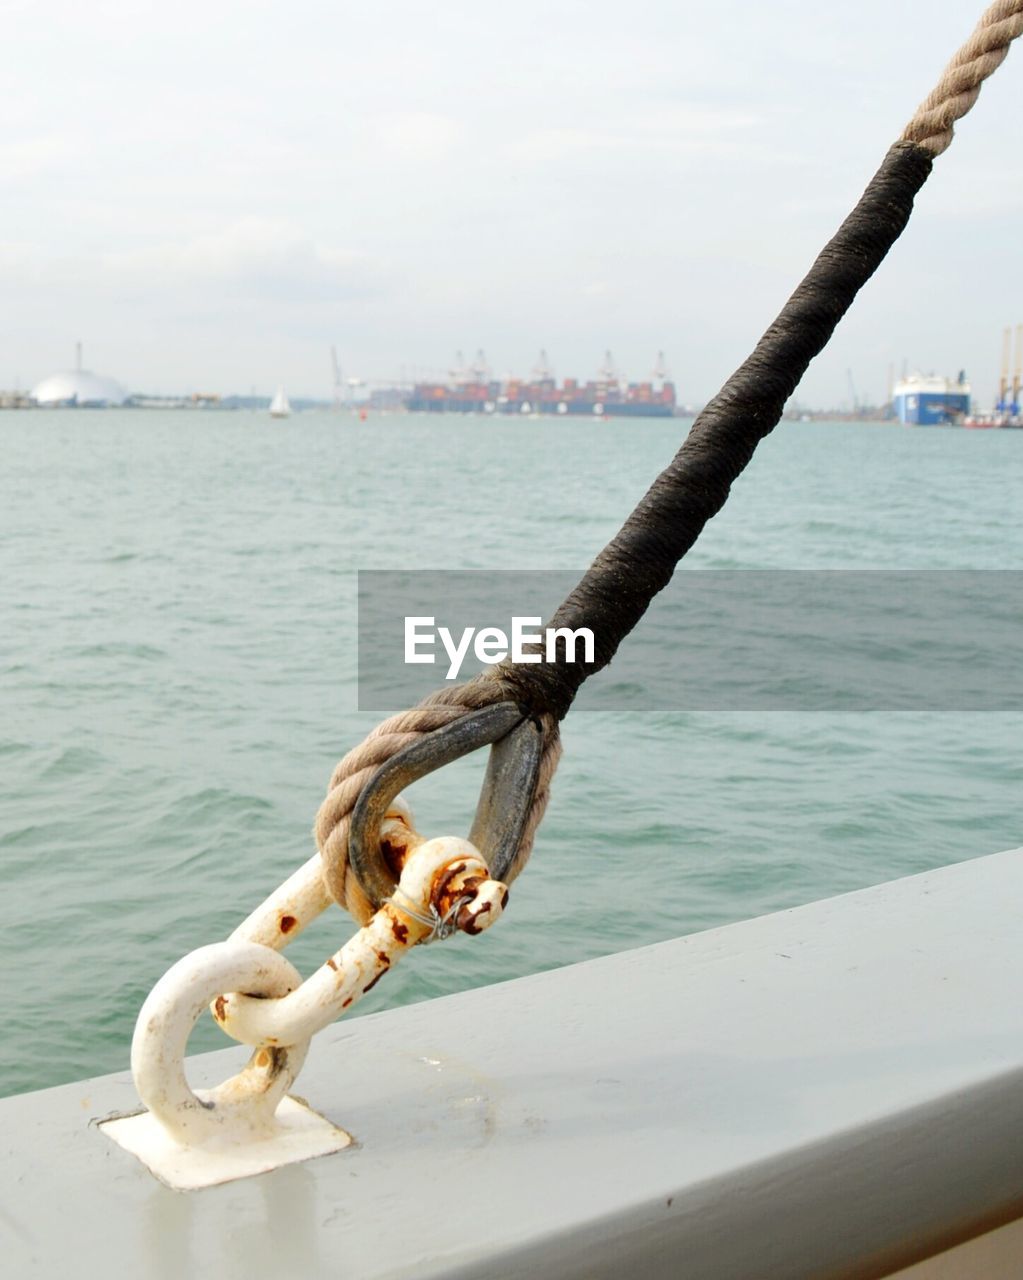 Shackle on boat